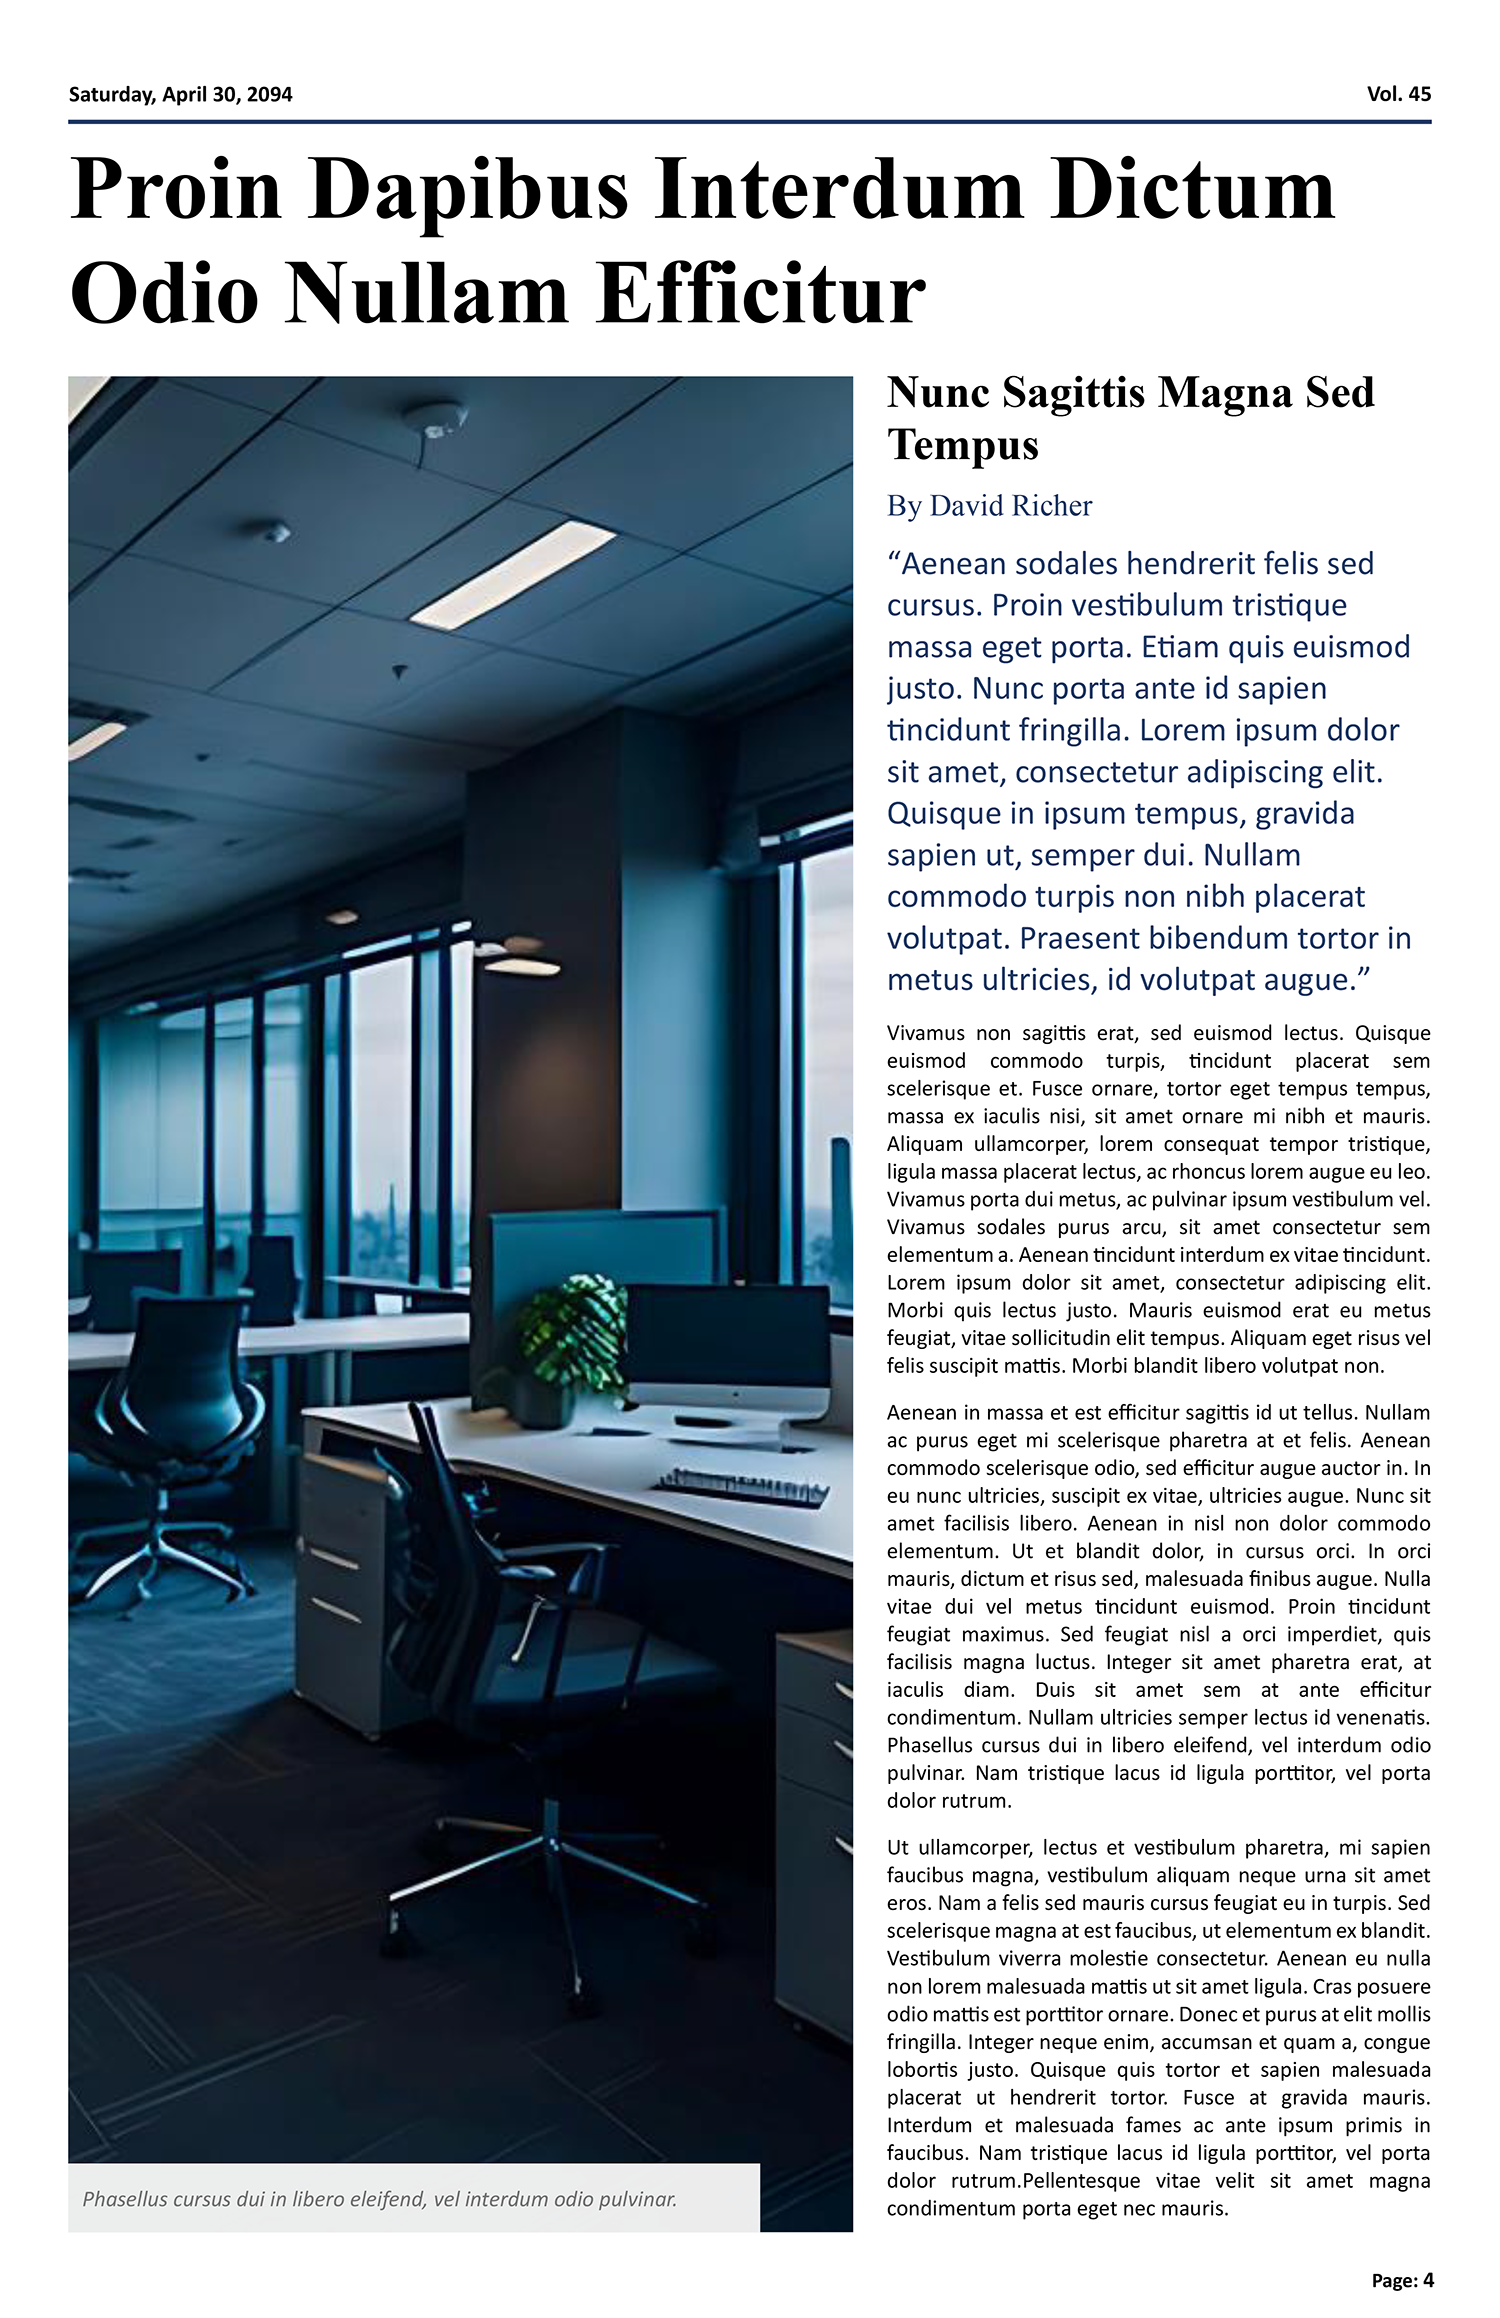 Professional Newspaper Article Template - Page 04